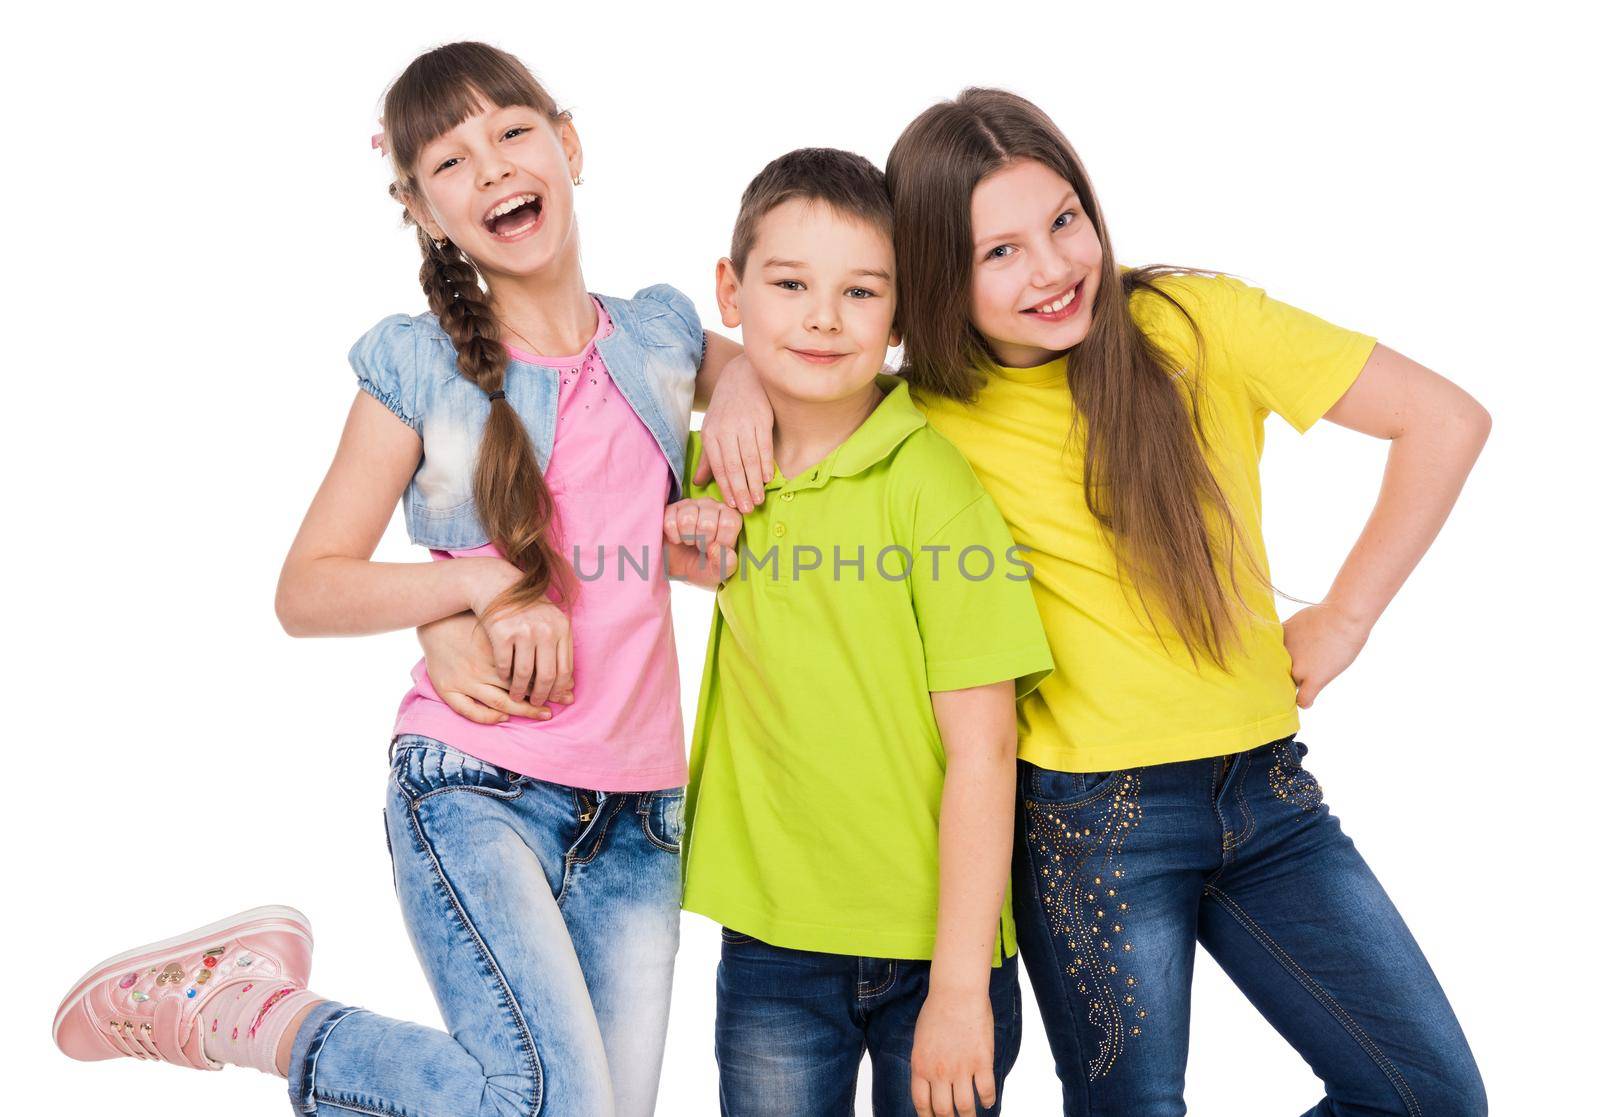 little cute boy embracing two laughing little girls isolated on white background